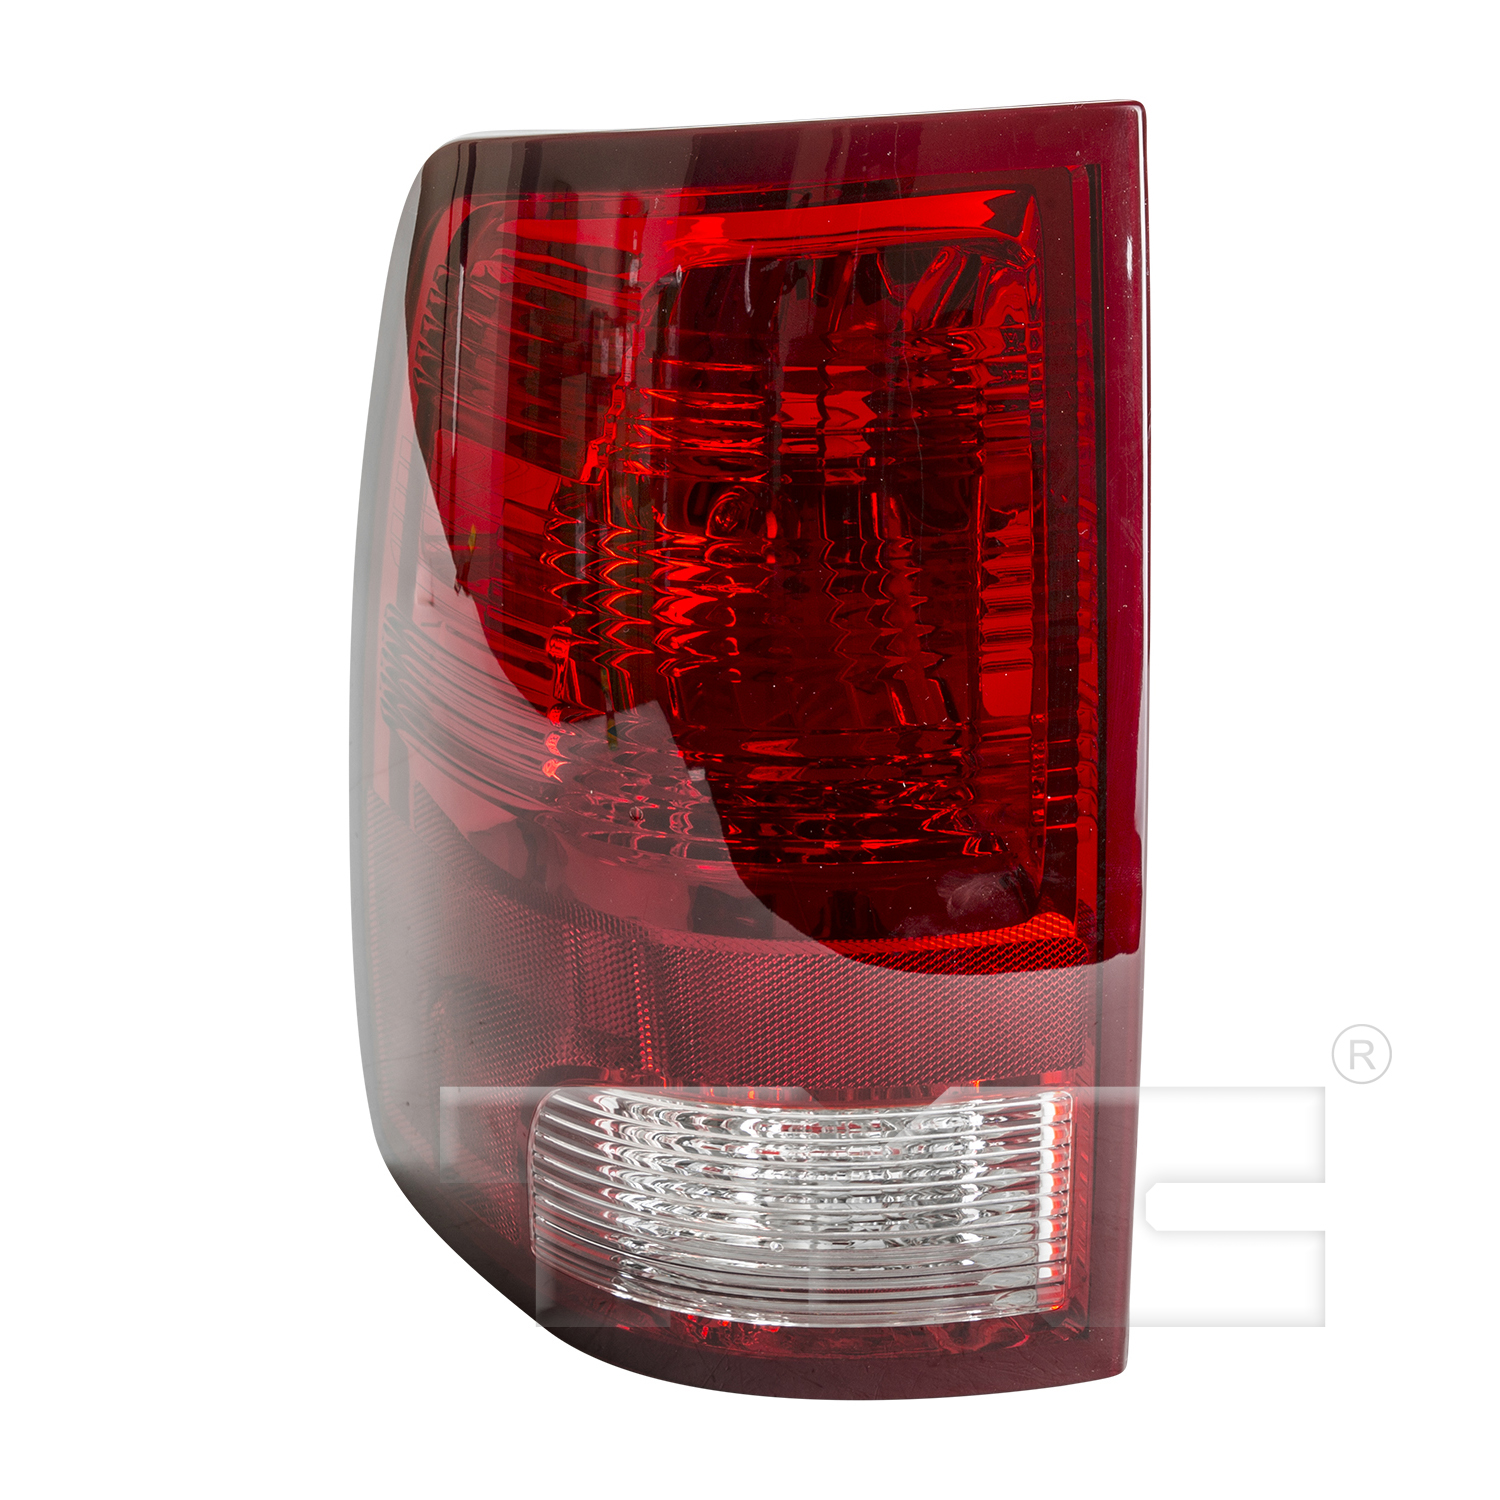 Aftermarket TAILLIGHTS for DODGE - RAM 1500, RAM 1500,09-10,LT Taillamp lens/housing